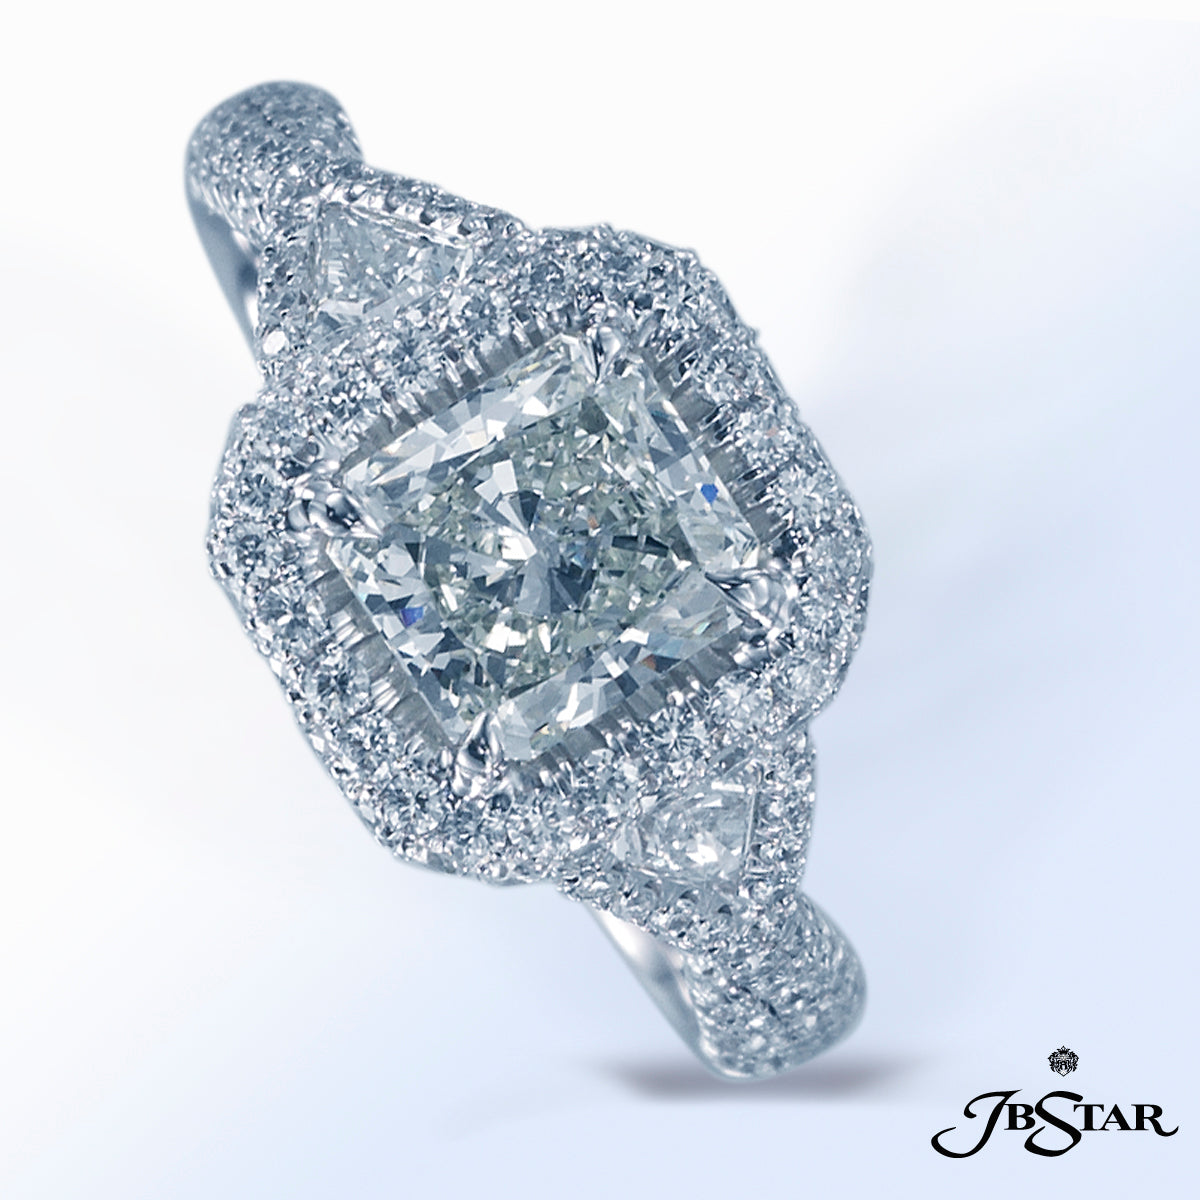 JB STAR PLATINUM EGL CERTIFIED 1.15CT COLOR-I CLARITY-VS2 1.23CT/VS/G DIAMOND RING FROM THE ENGAGEMENT RING COLLECTION